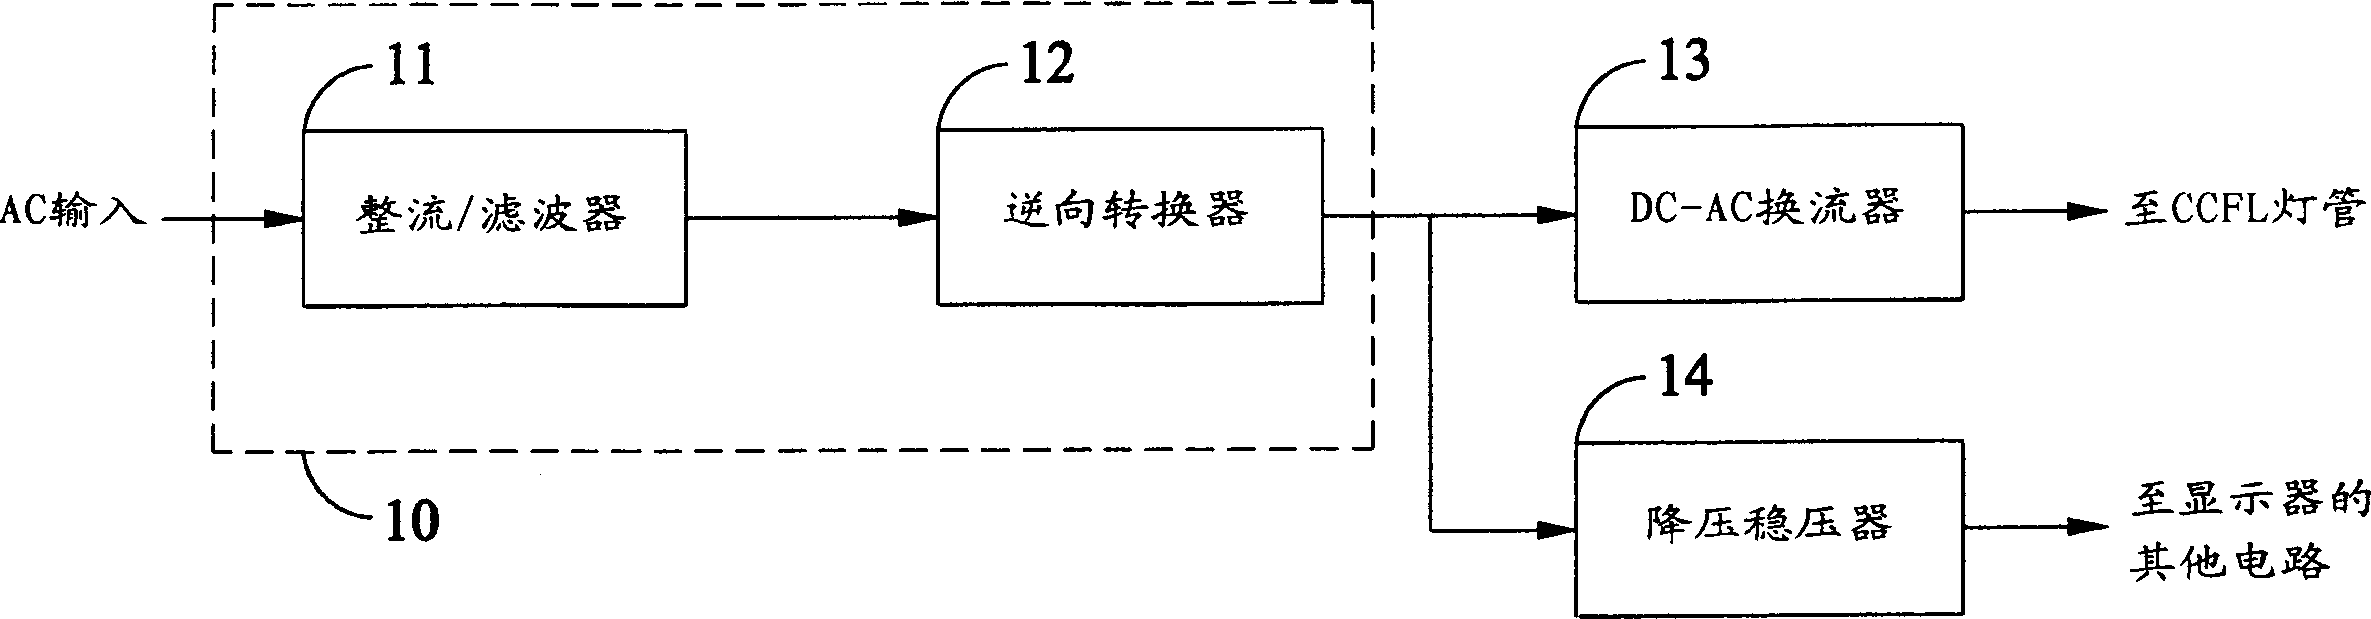 Power supply unit and used current converter